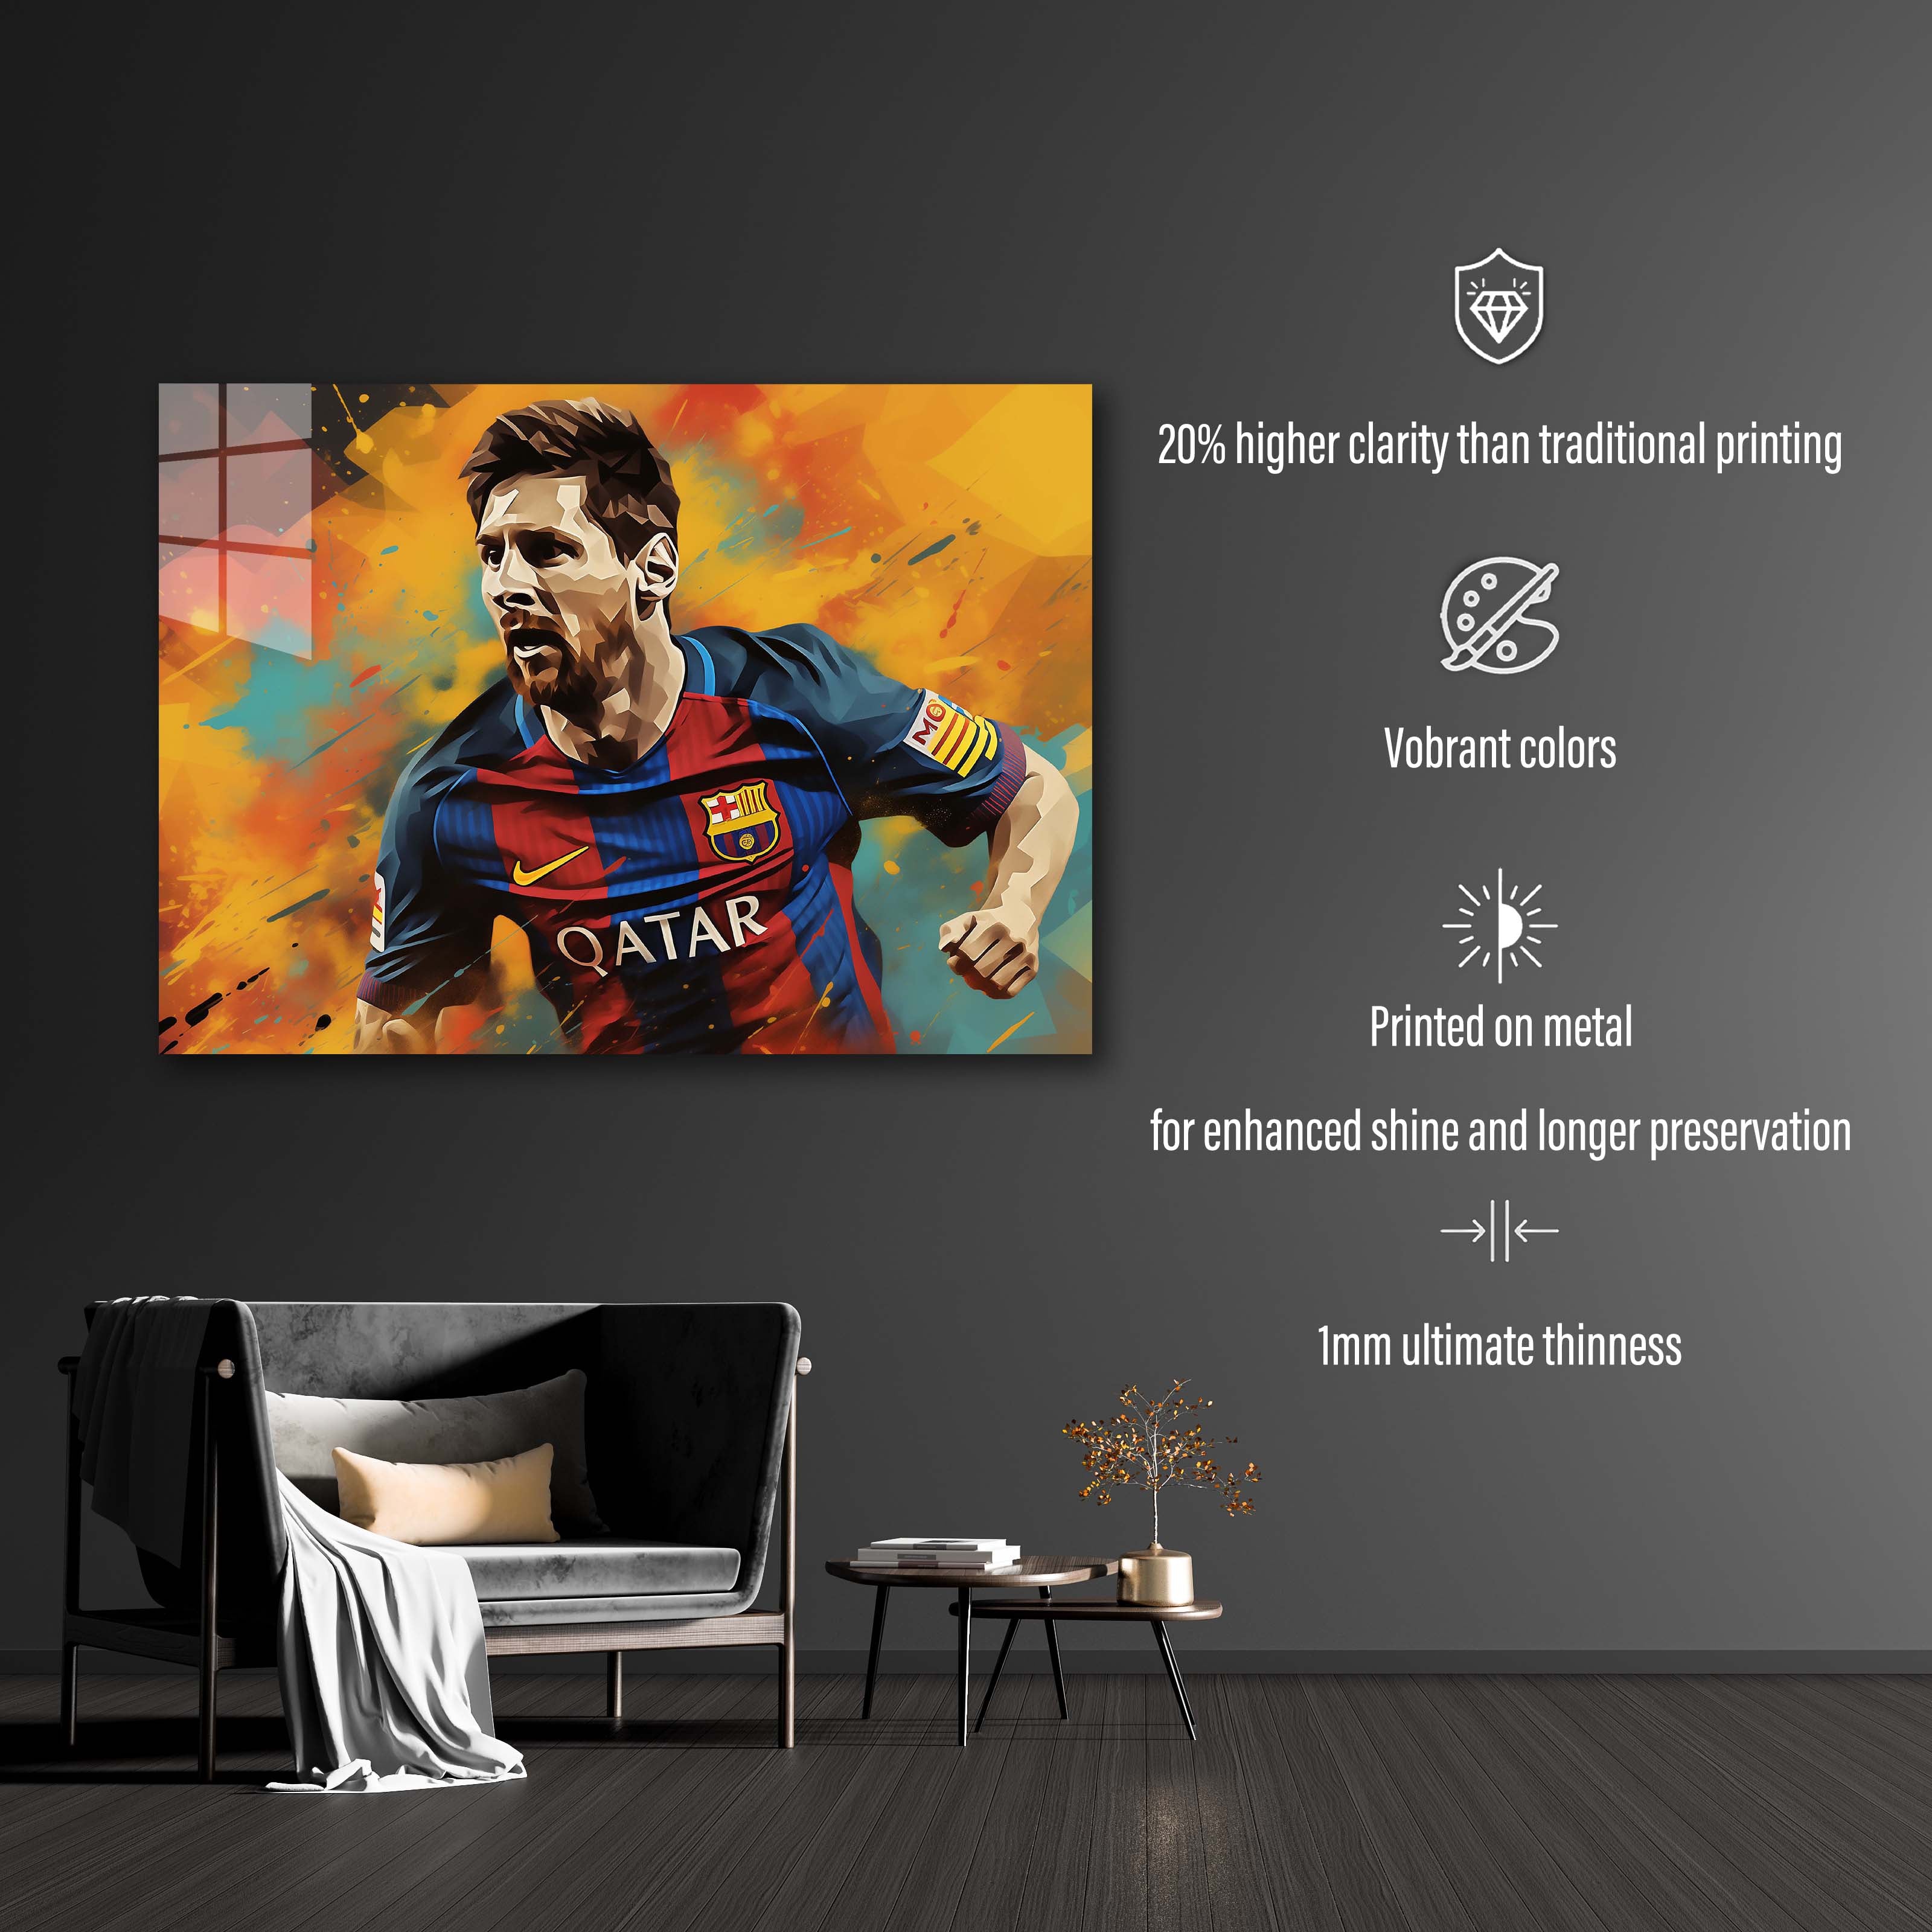 Lionel Messi Smoke-designed by @DynCreative